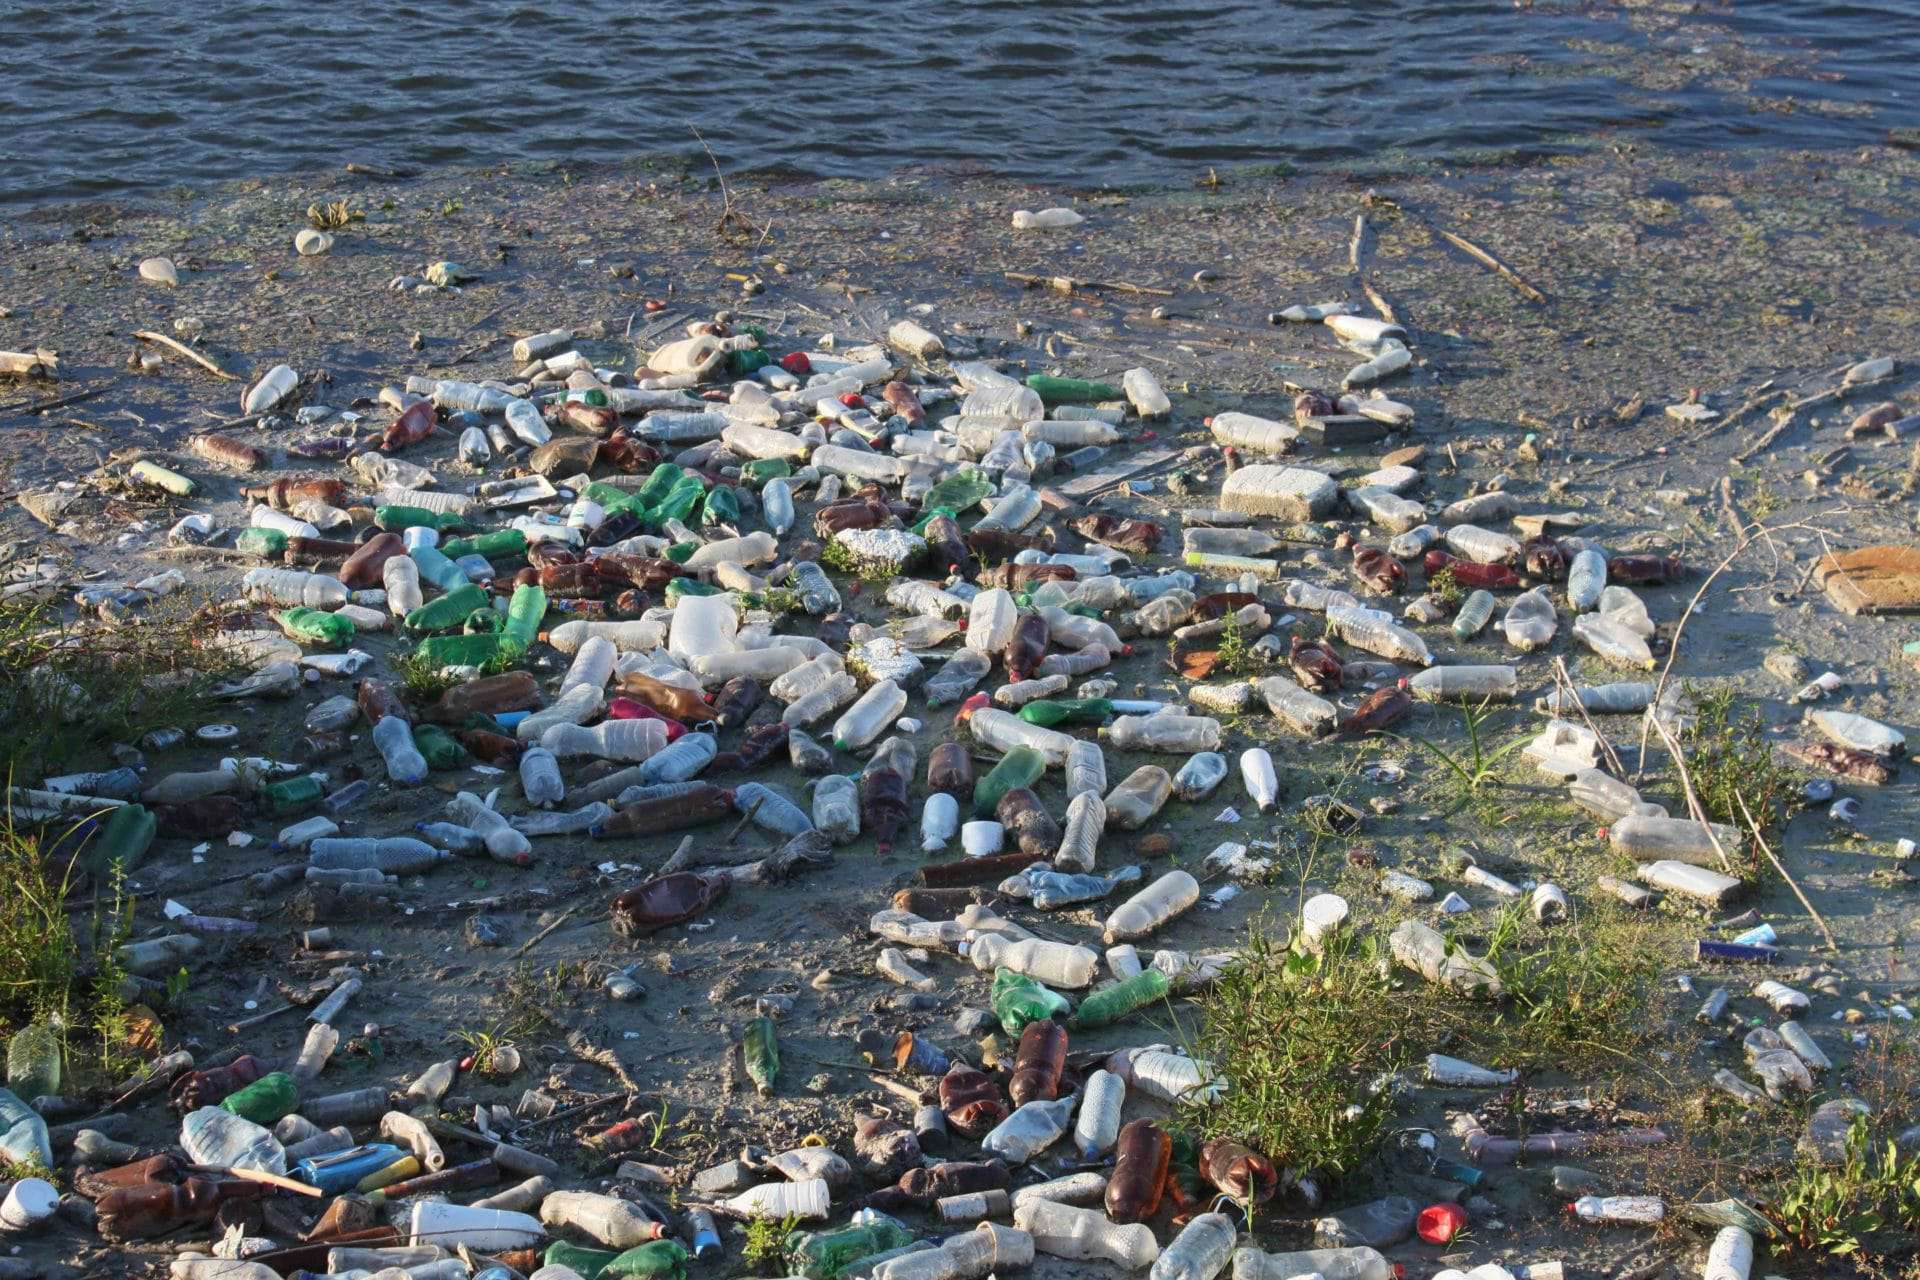 A pile of plastic garbage on the beach symbolizes the environment crisis